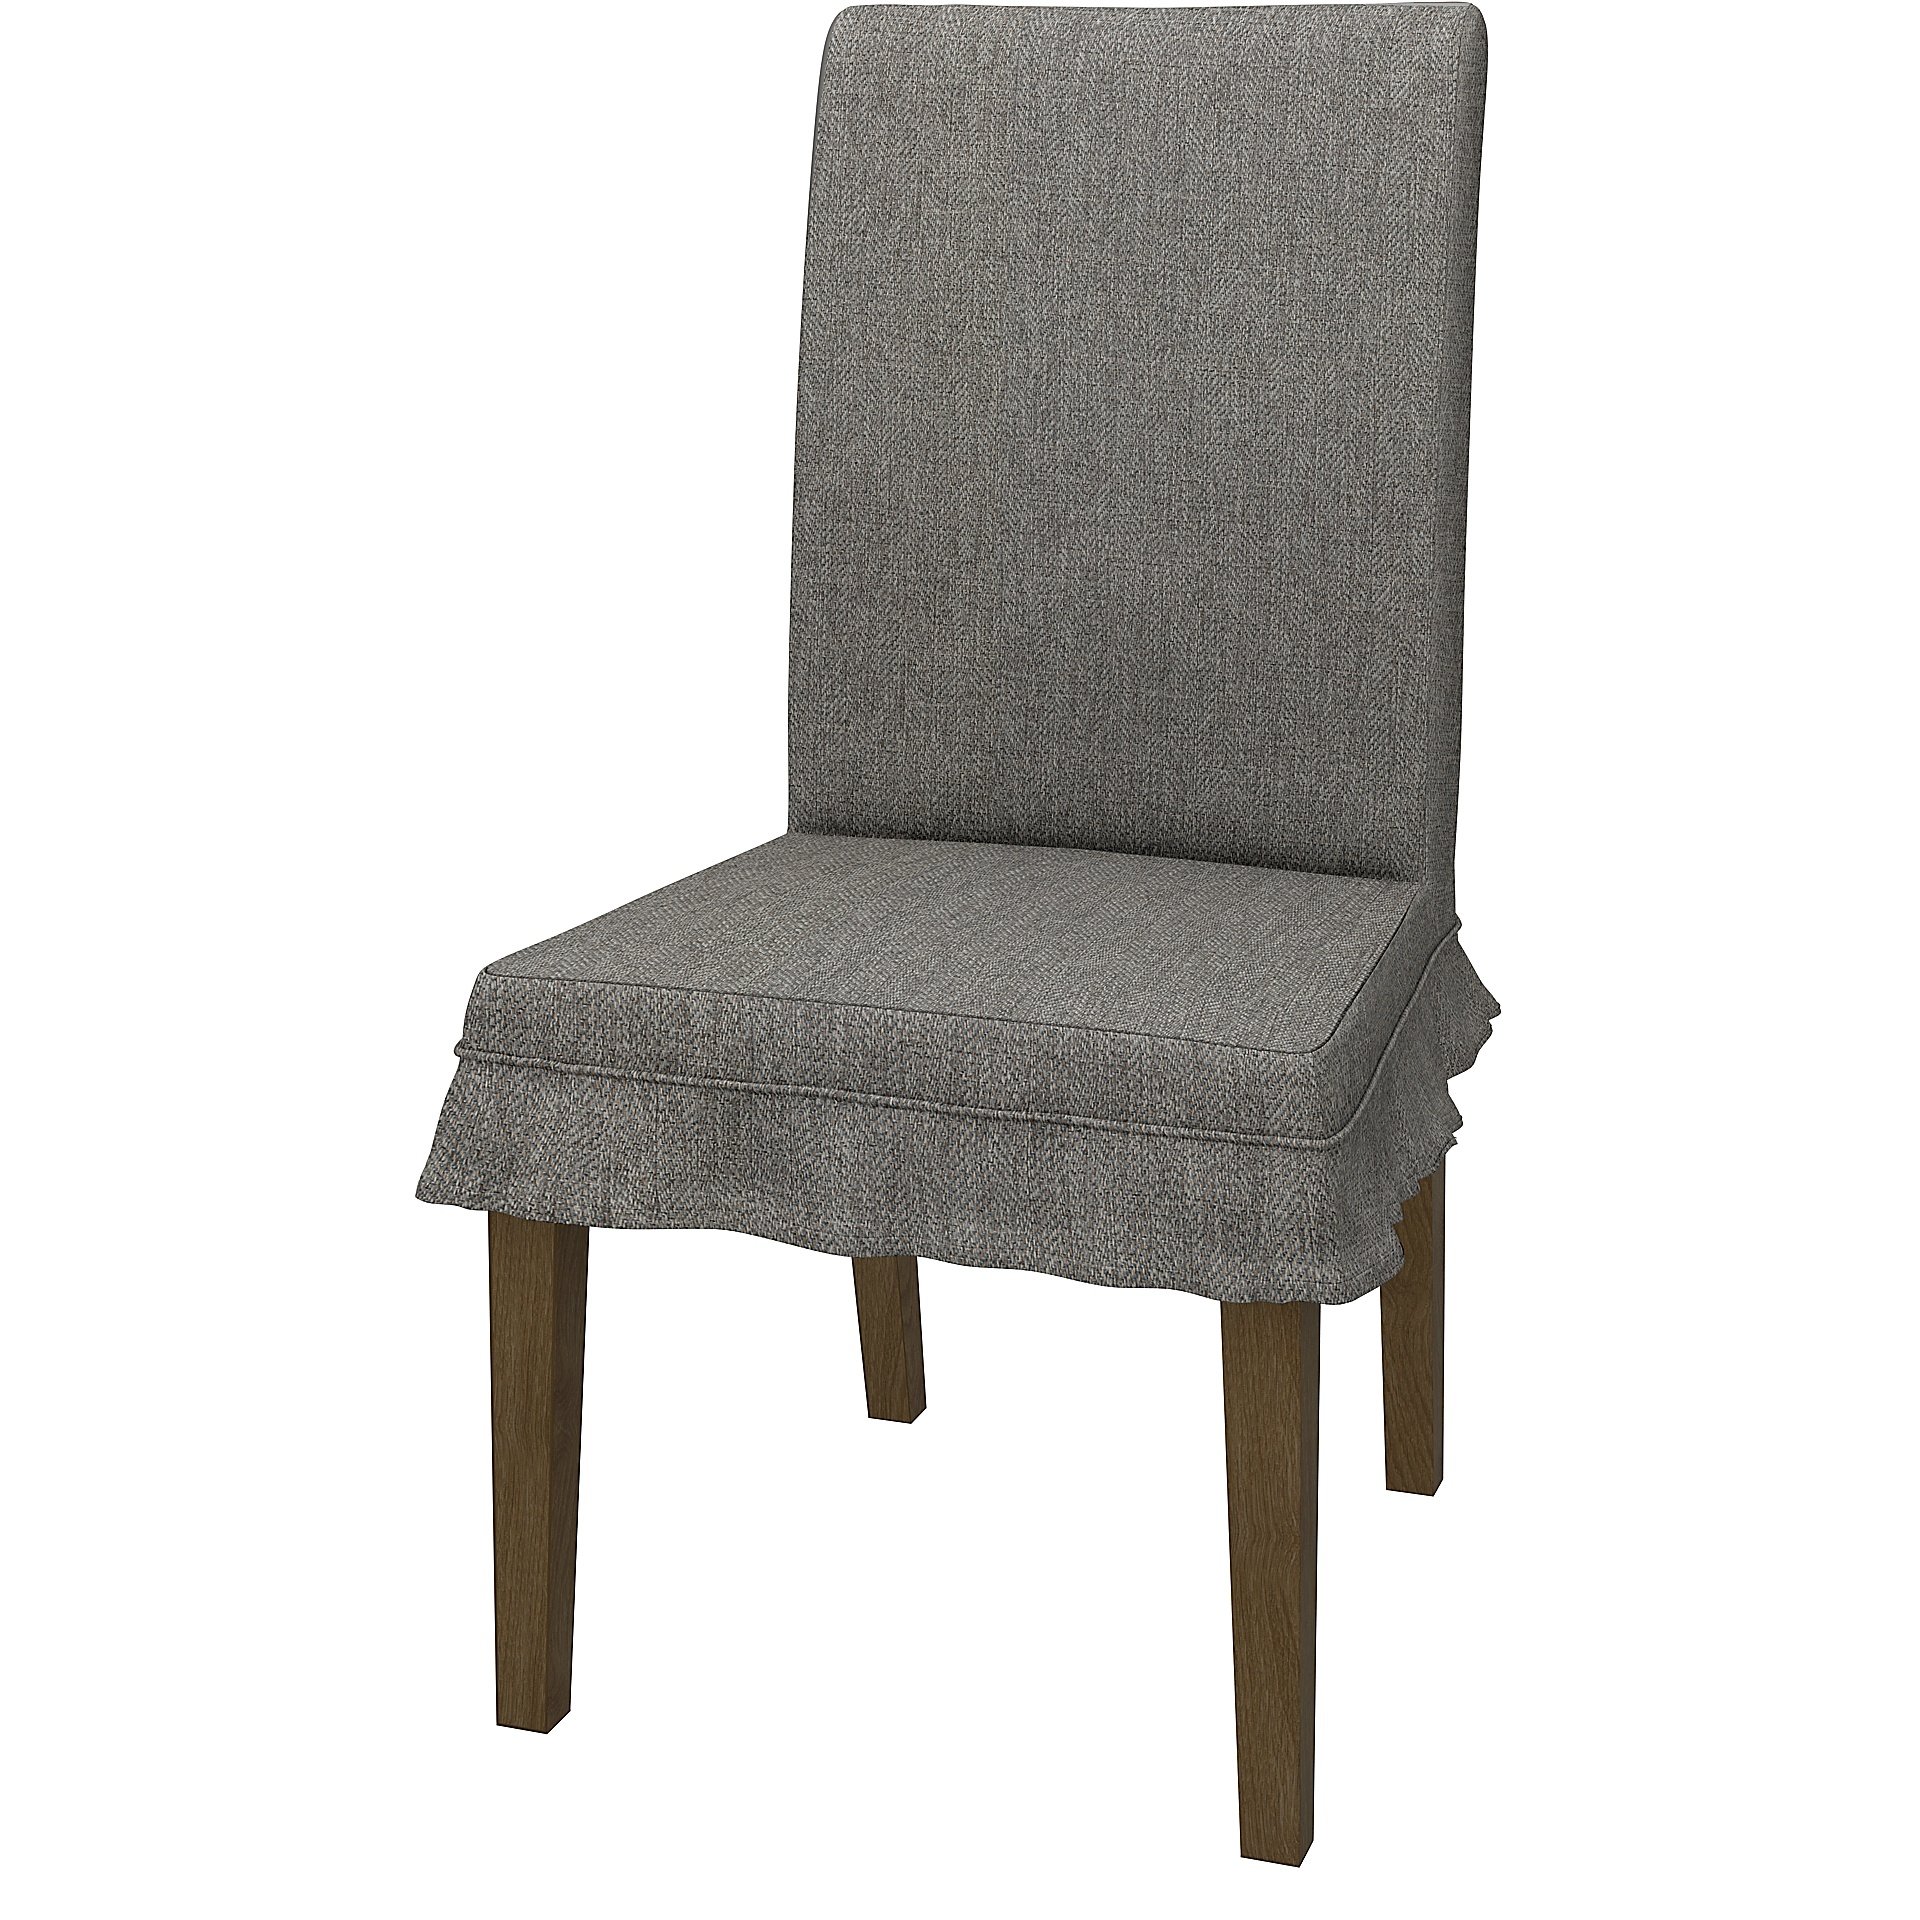 IKEA - HENRIKSDAL DINING CHAIR COVER SHORT SKIRT WITH RUFFLES (STANDARD MODEL), Taupe, Boucle & Text